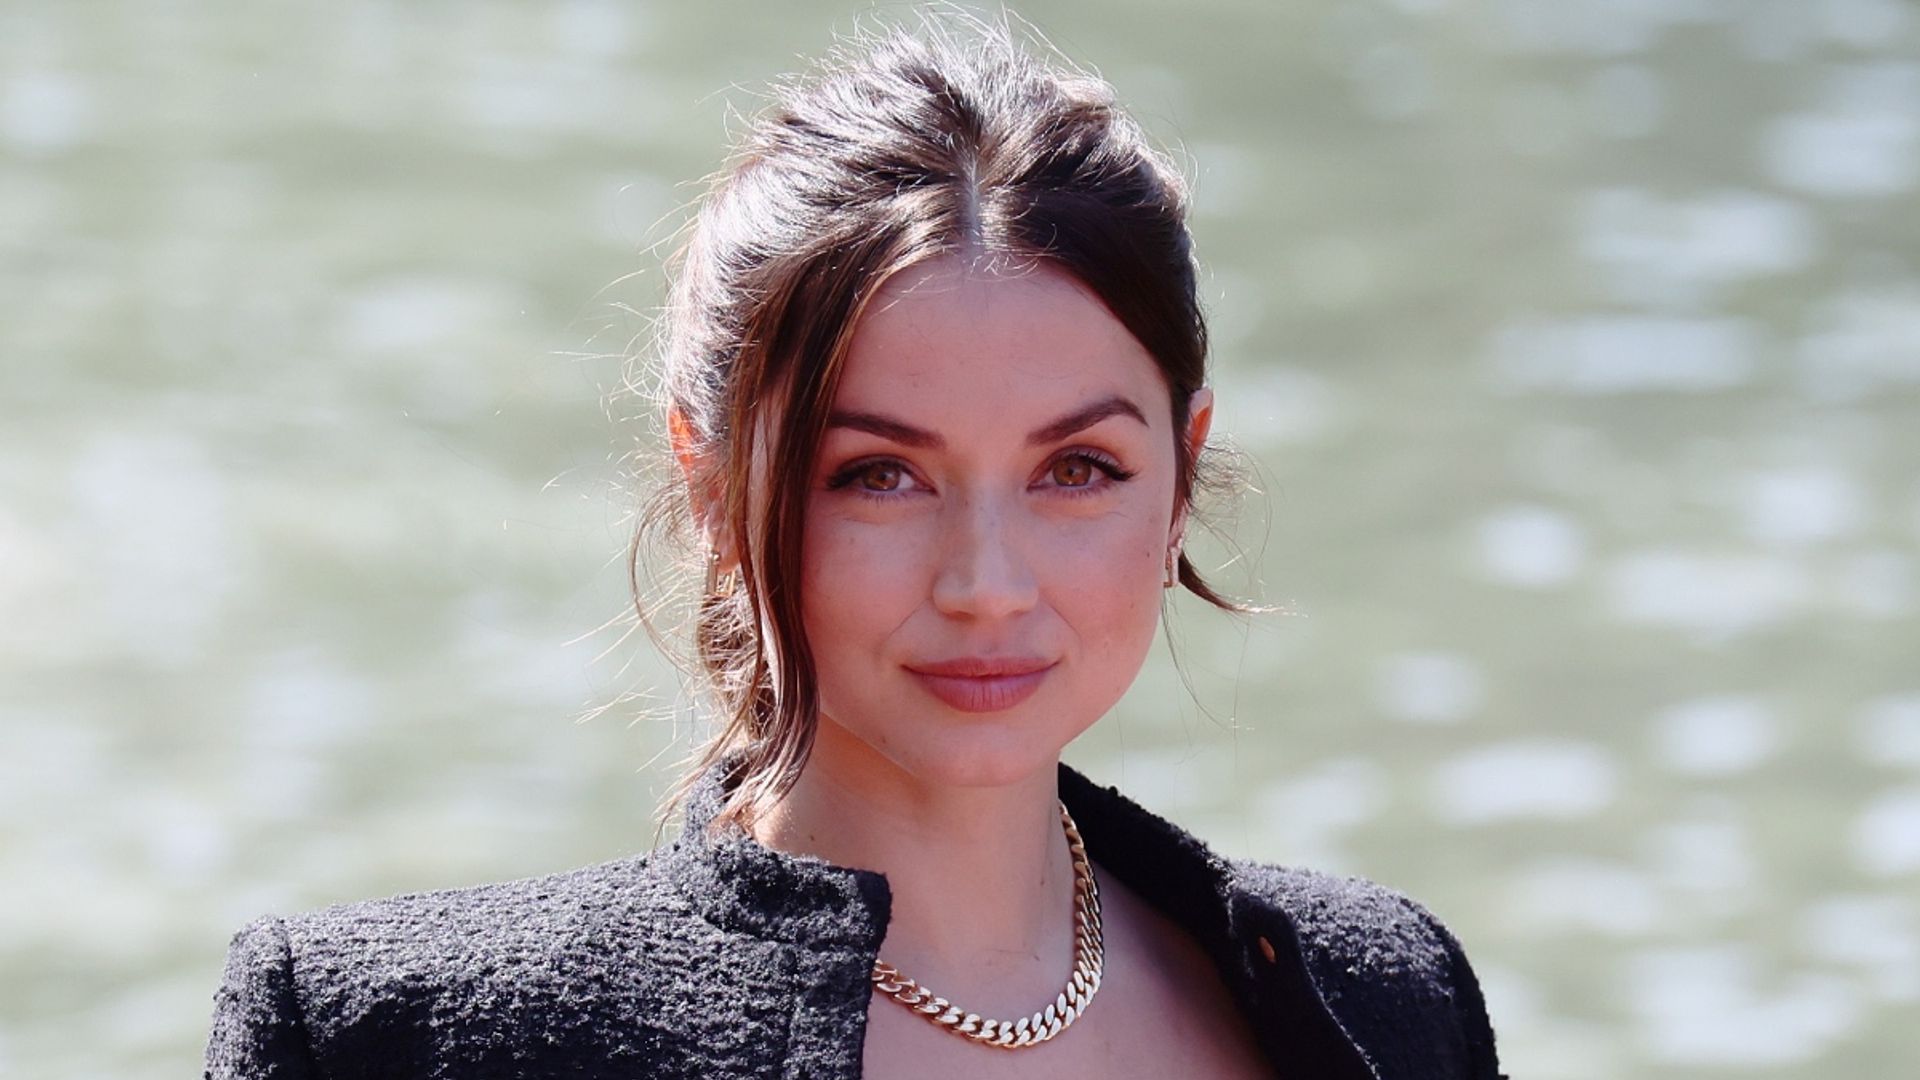 Here's Everything We Know About Ana de Armas, the New Bond Girl